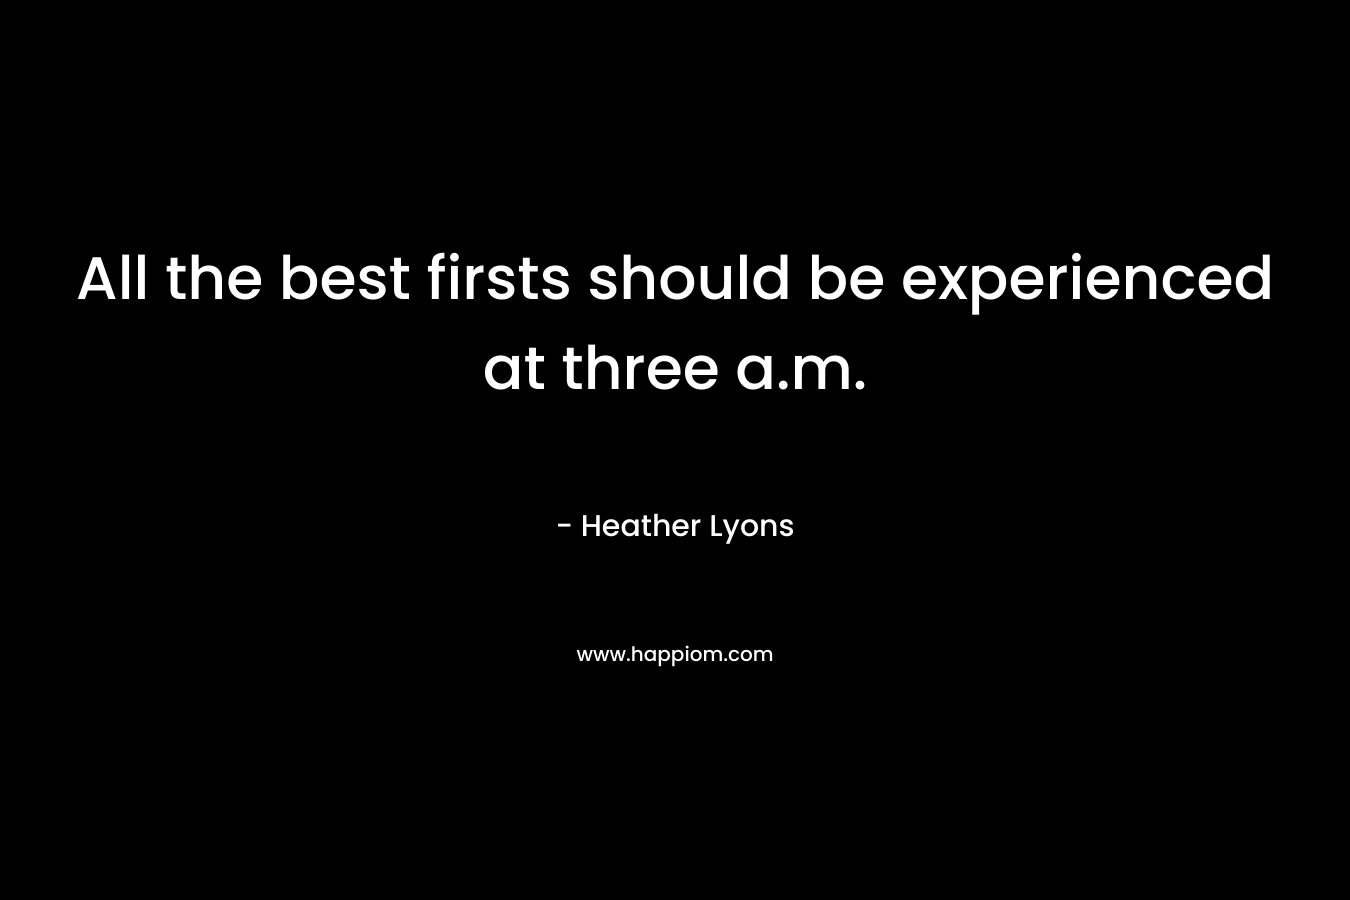 All the best firsts should be experienced at three a.m.